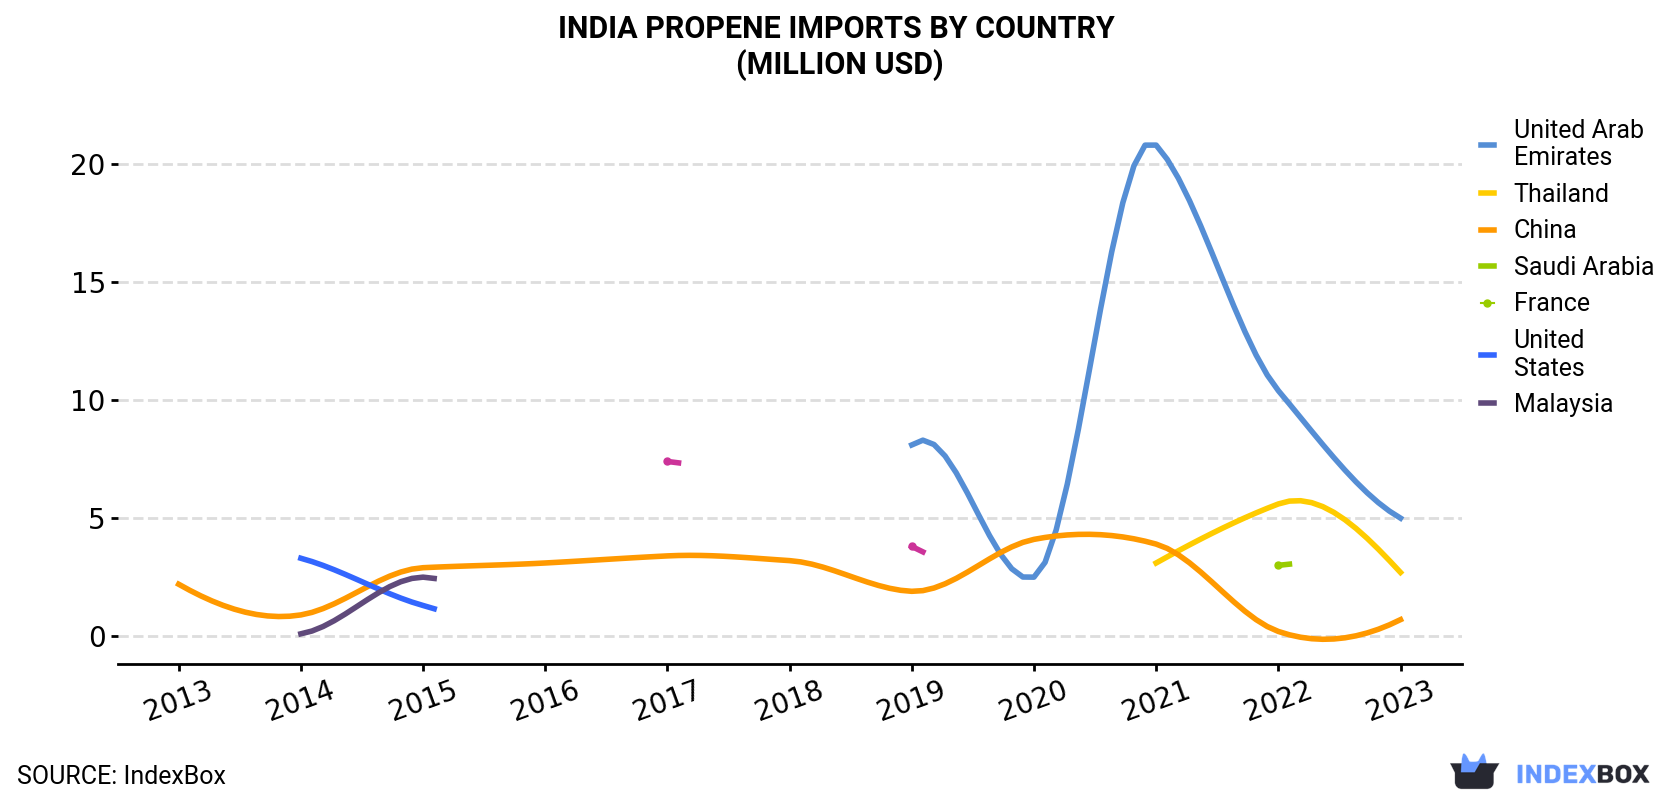 India Propene Imports By Country (Million USD)